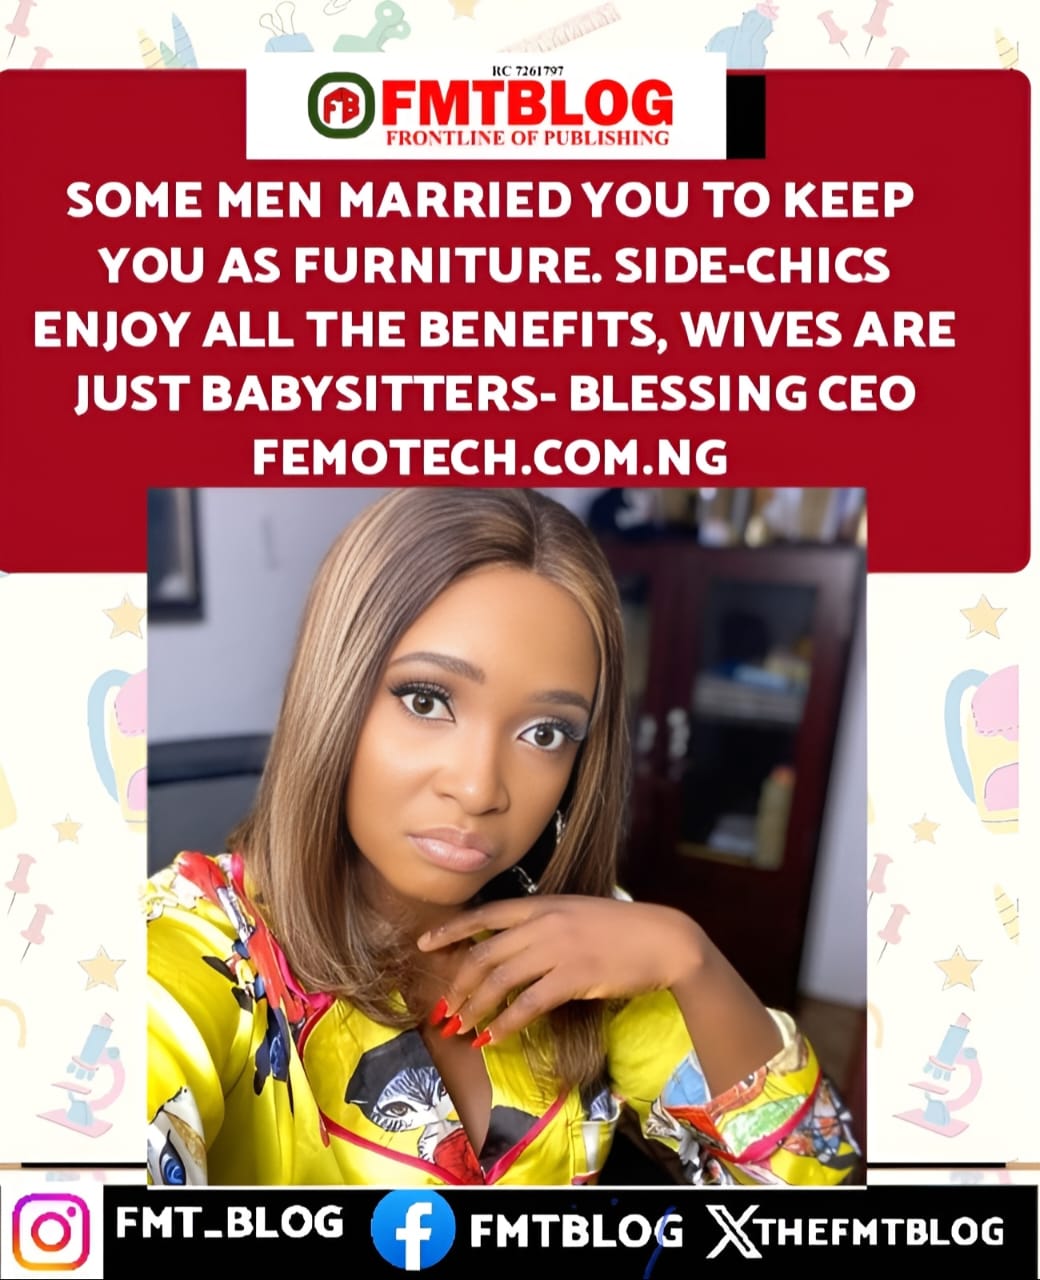 Some Men Married You To Keep You As Furniture. Side-Chics Enjoy All The Benefits, Wives Are Just Babysitters- Blessing CEO Claims